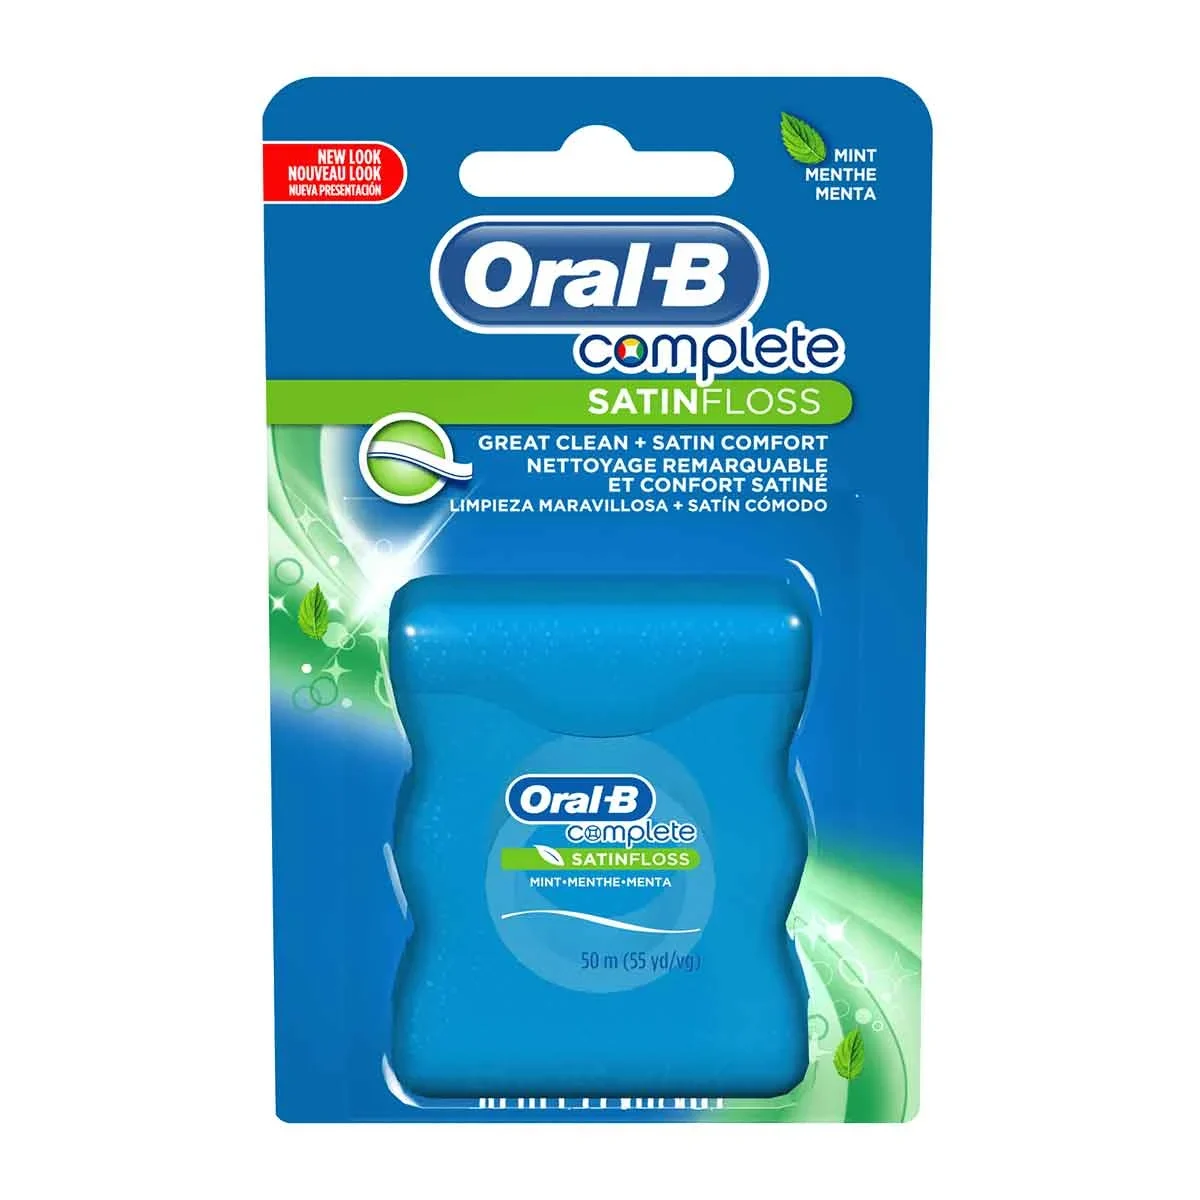 Oral-B Complete SATINfloss Soie Dentaire 